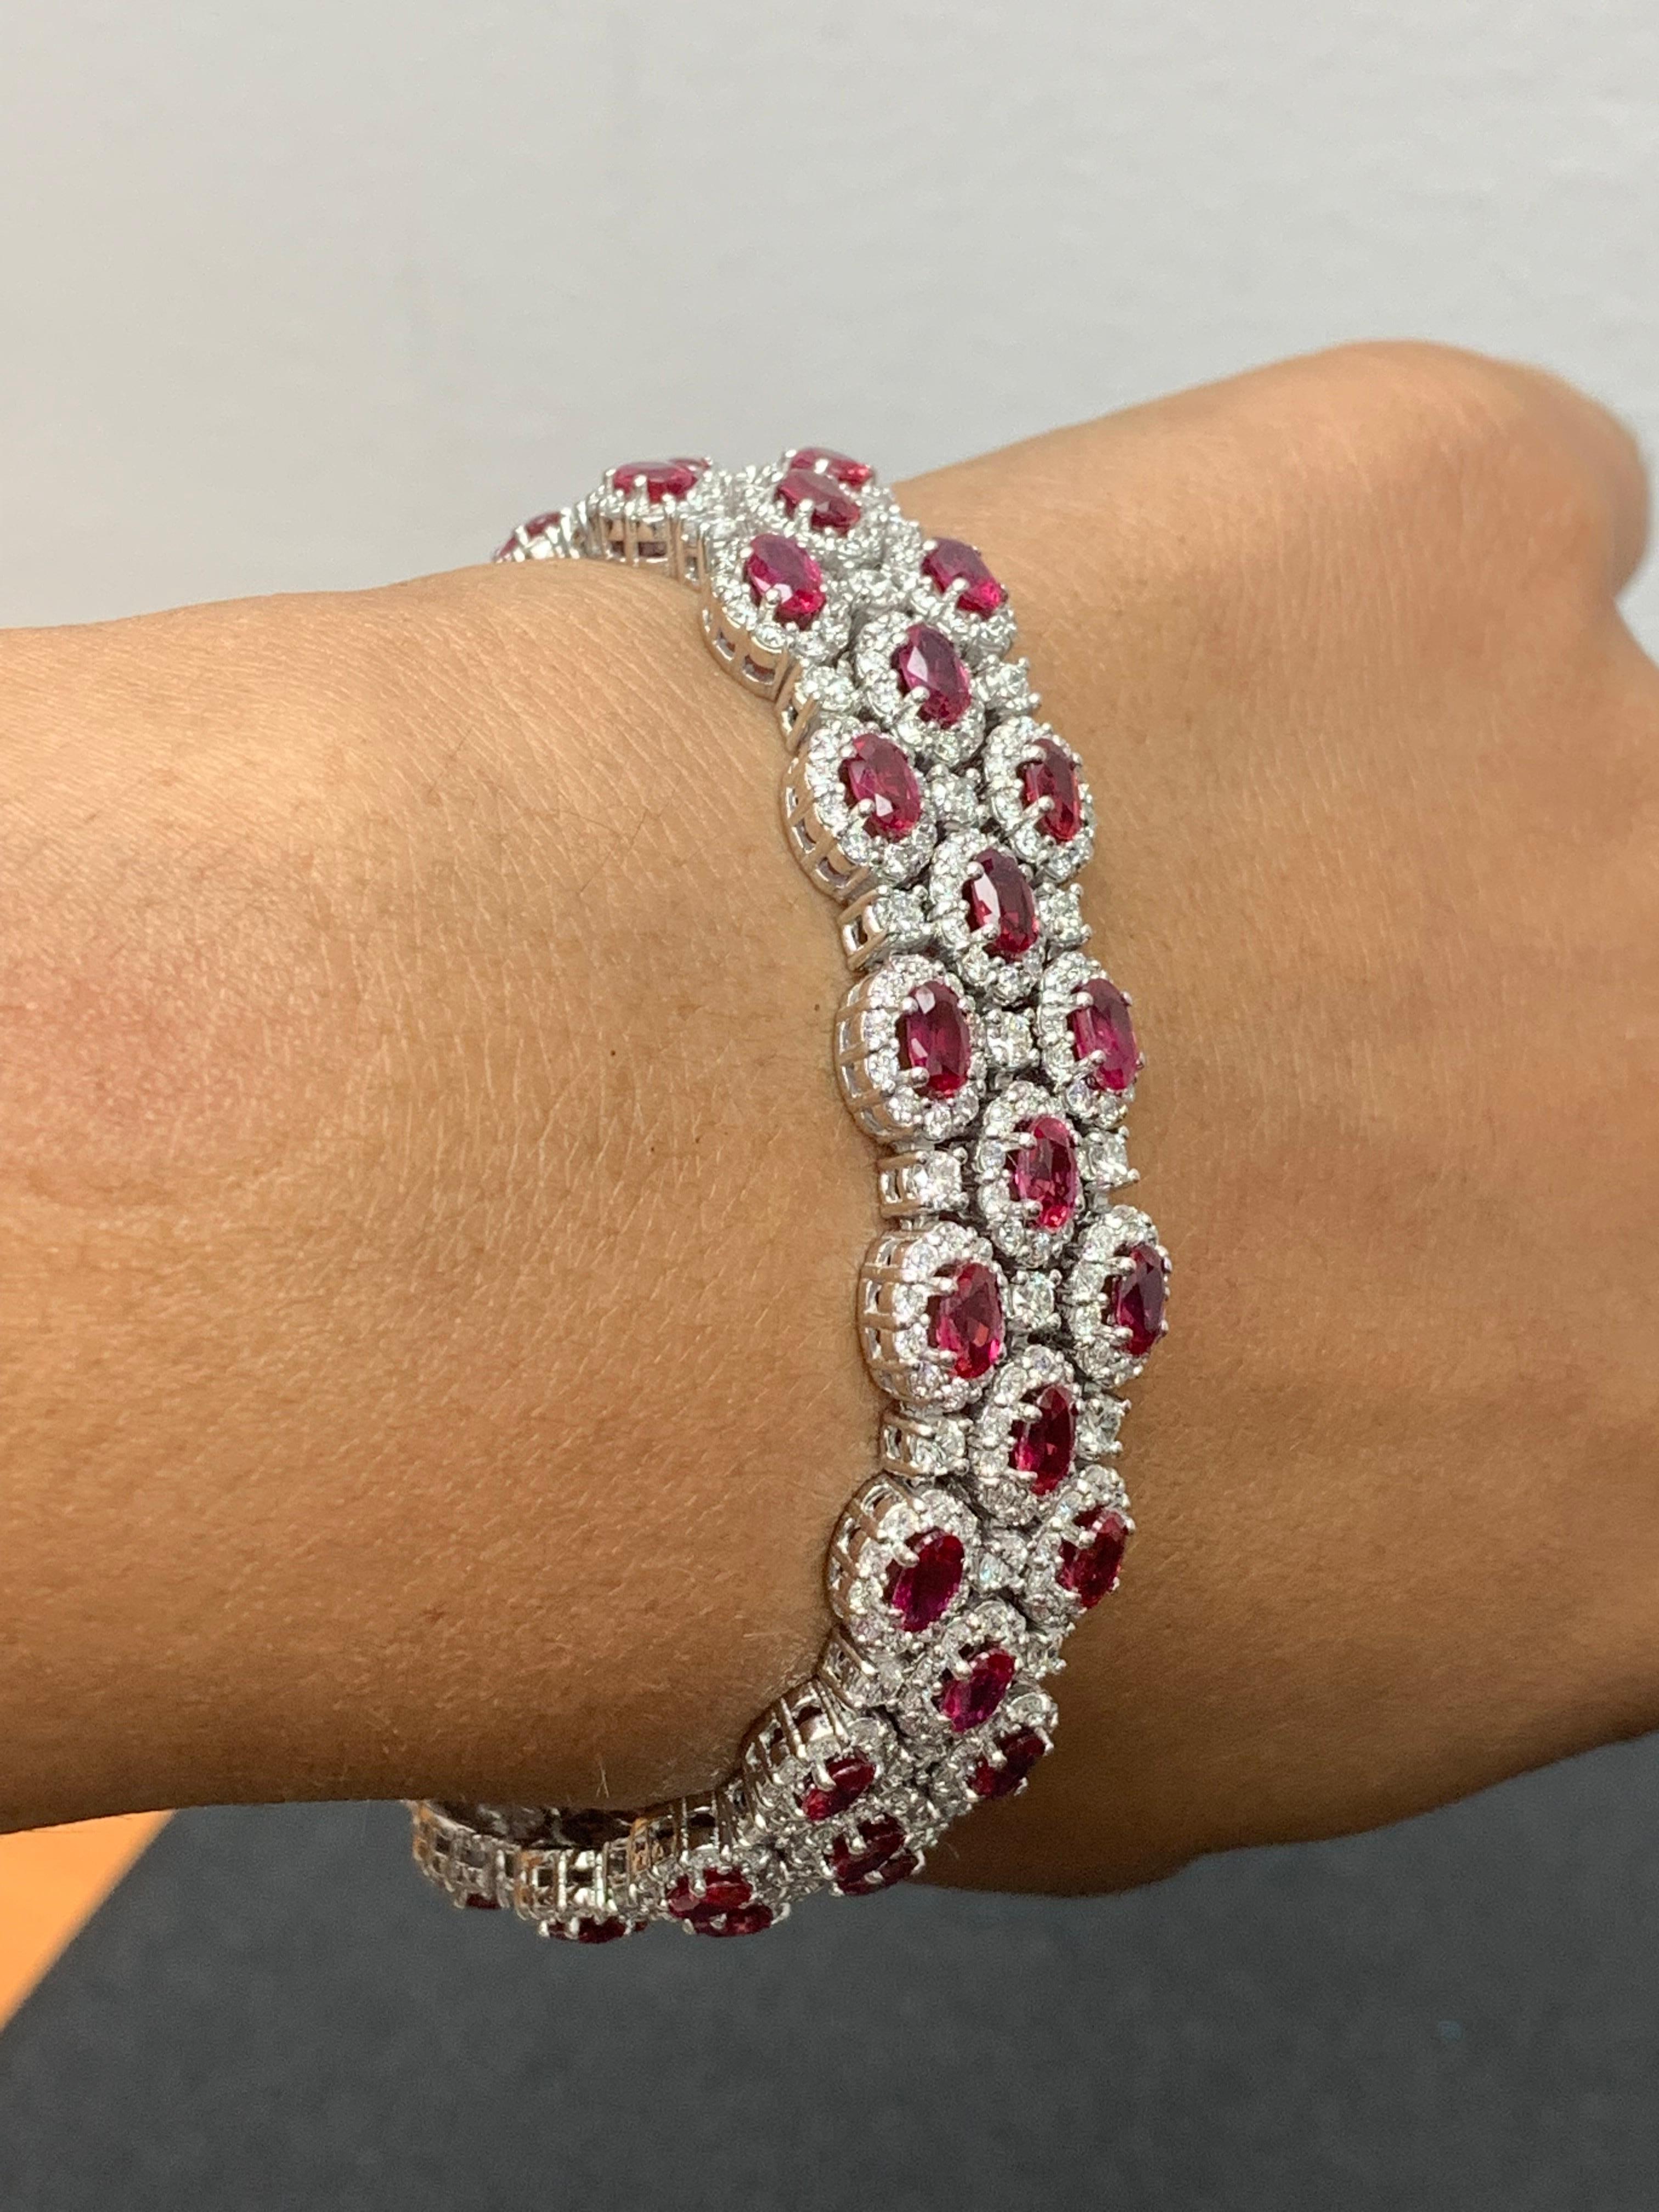 A beautiful vivid red Rubies and Diamond 3-row bracelet showcasing color-rich Rubies, surrounded by a single row of brilliant round diamonds. 51 Oval cut rubies weigh 14.91 carats total; 561 accent diamonds weigh 9.66 carats total. Made in 14k white